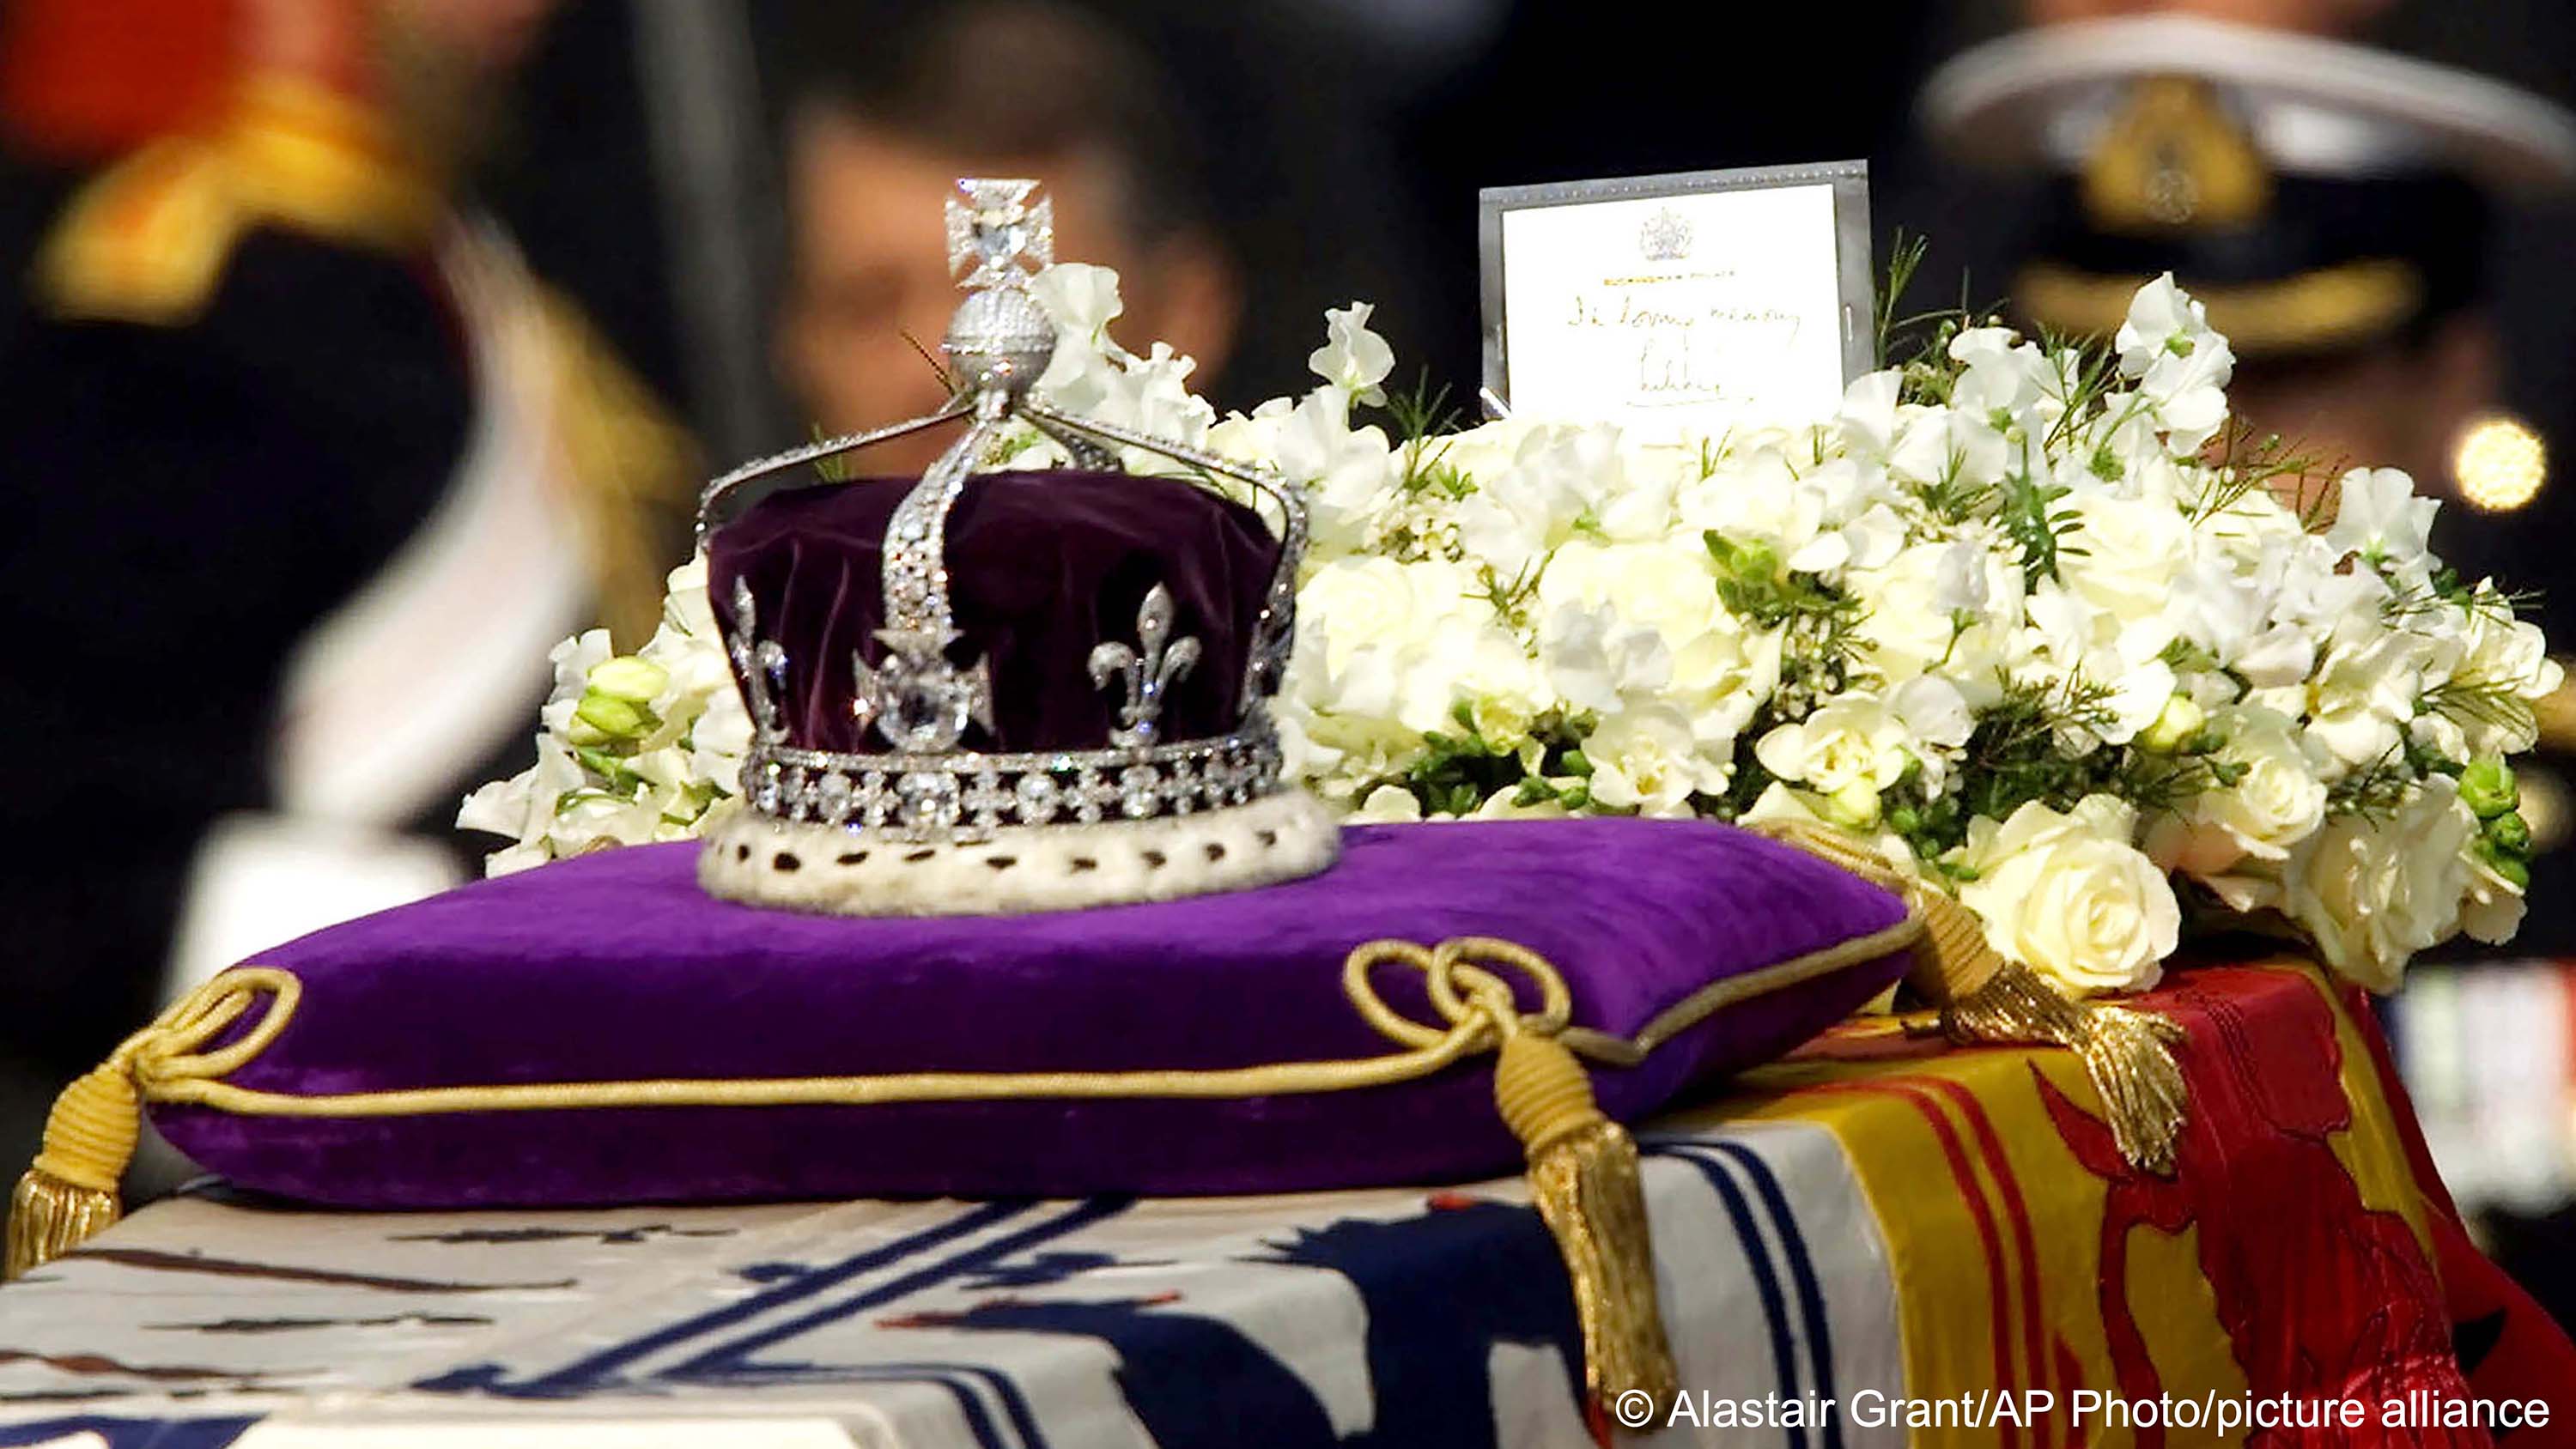 The Koh-i-noor, or "mountain of light", diamond, set in the Maltese Cross at the front of the crown made for Britain's late Queen Mother Elizabeth, is seen on her coffin, along with her personal standard, a wreath and a note from her daughter, Queen Elizabeth II, as it is drawn to London's Westminster Hall, 5 April 2002 (photo: AP Photo/Alastair Grant, File)